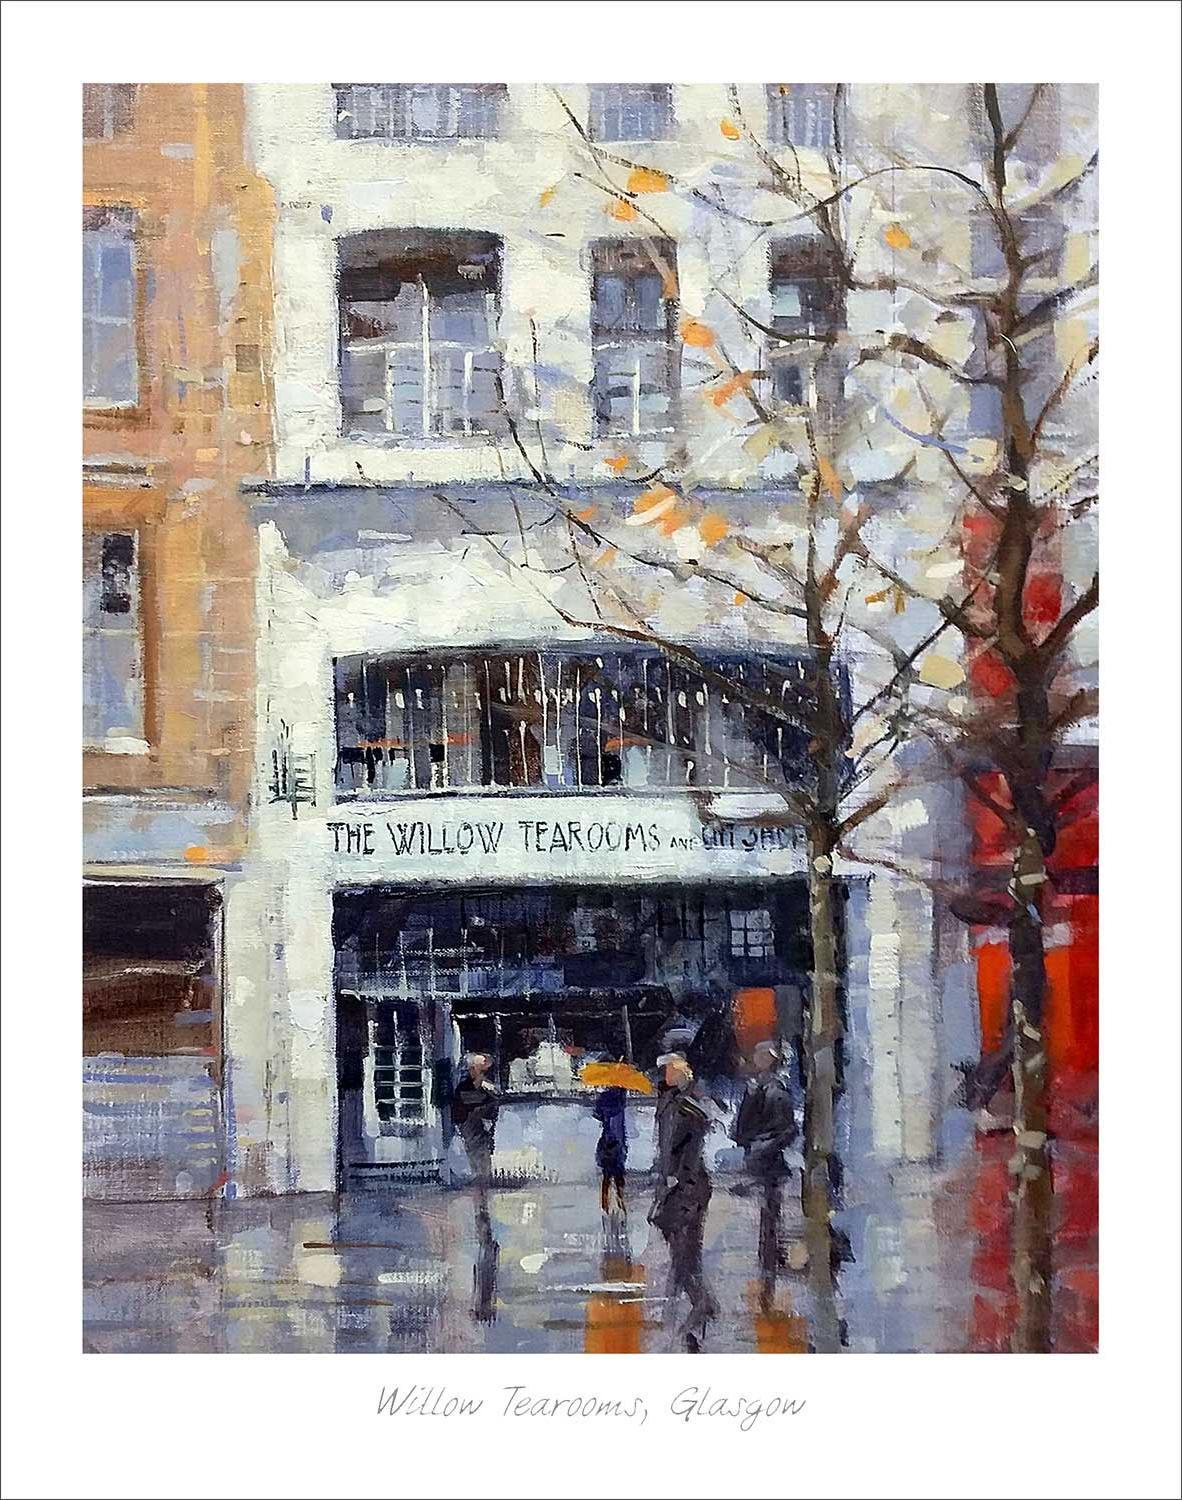 Willow Tearooms, Glasgow Art Print from an original painted by artist Peter Foyle